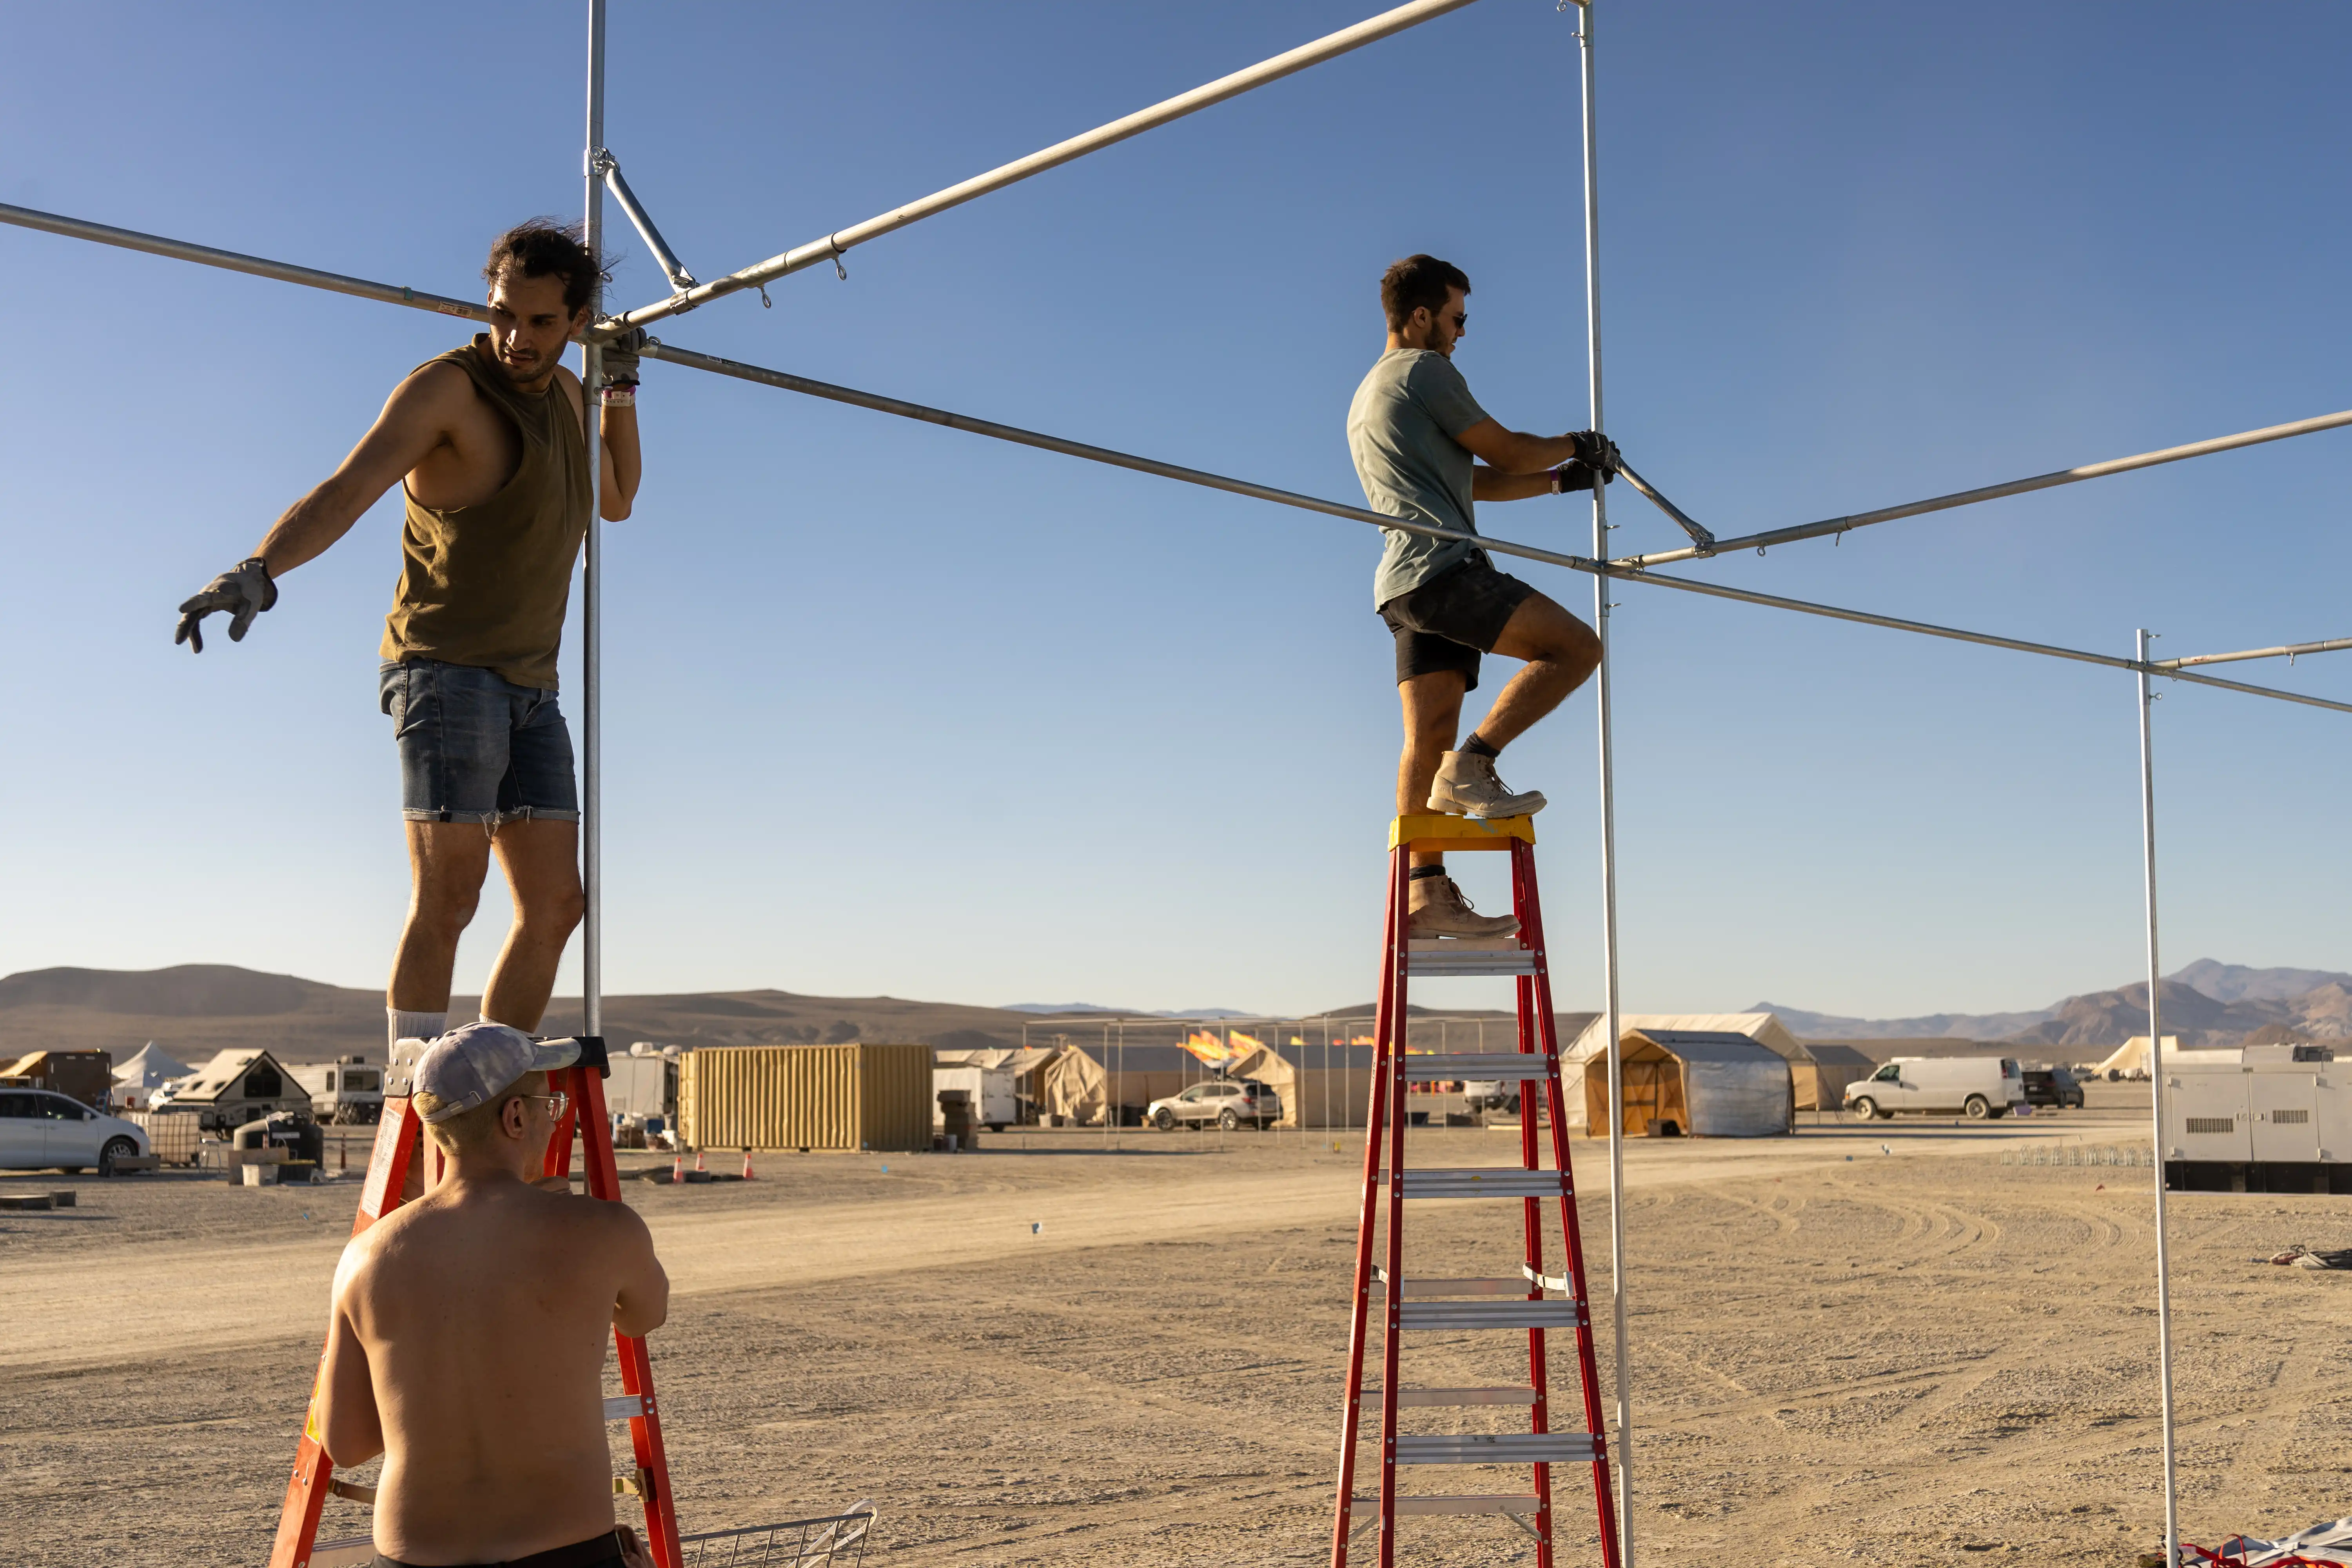 Building a shade struture at Burning Man. Two men are on ladders while another shirtless man holds the ladder. The men are erecting the frame of a structure by connecting metal pipes. In the background, other camps, tents, and vehicles.